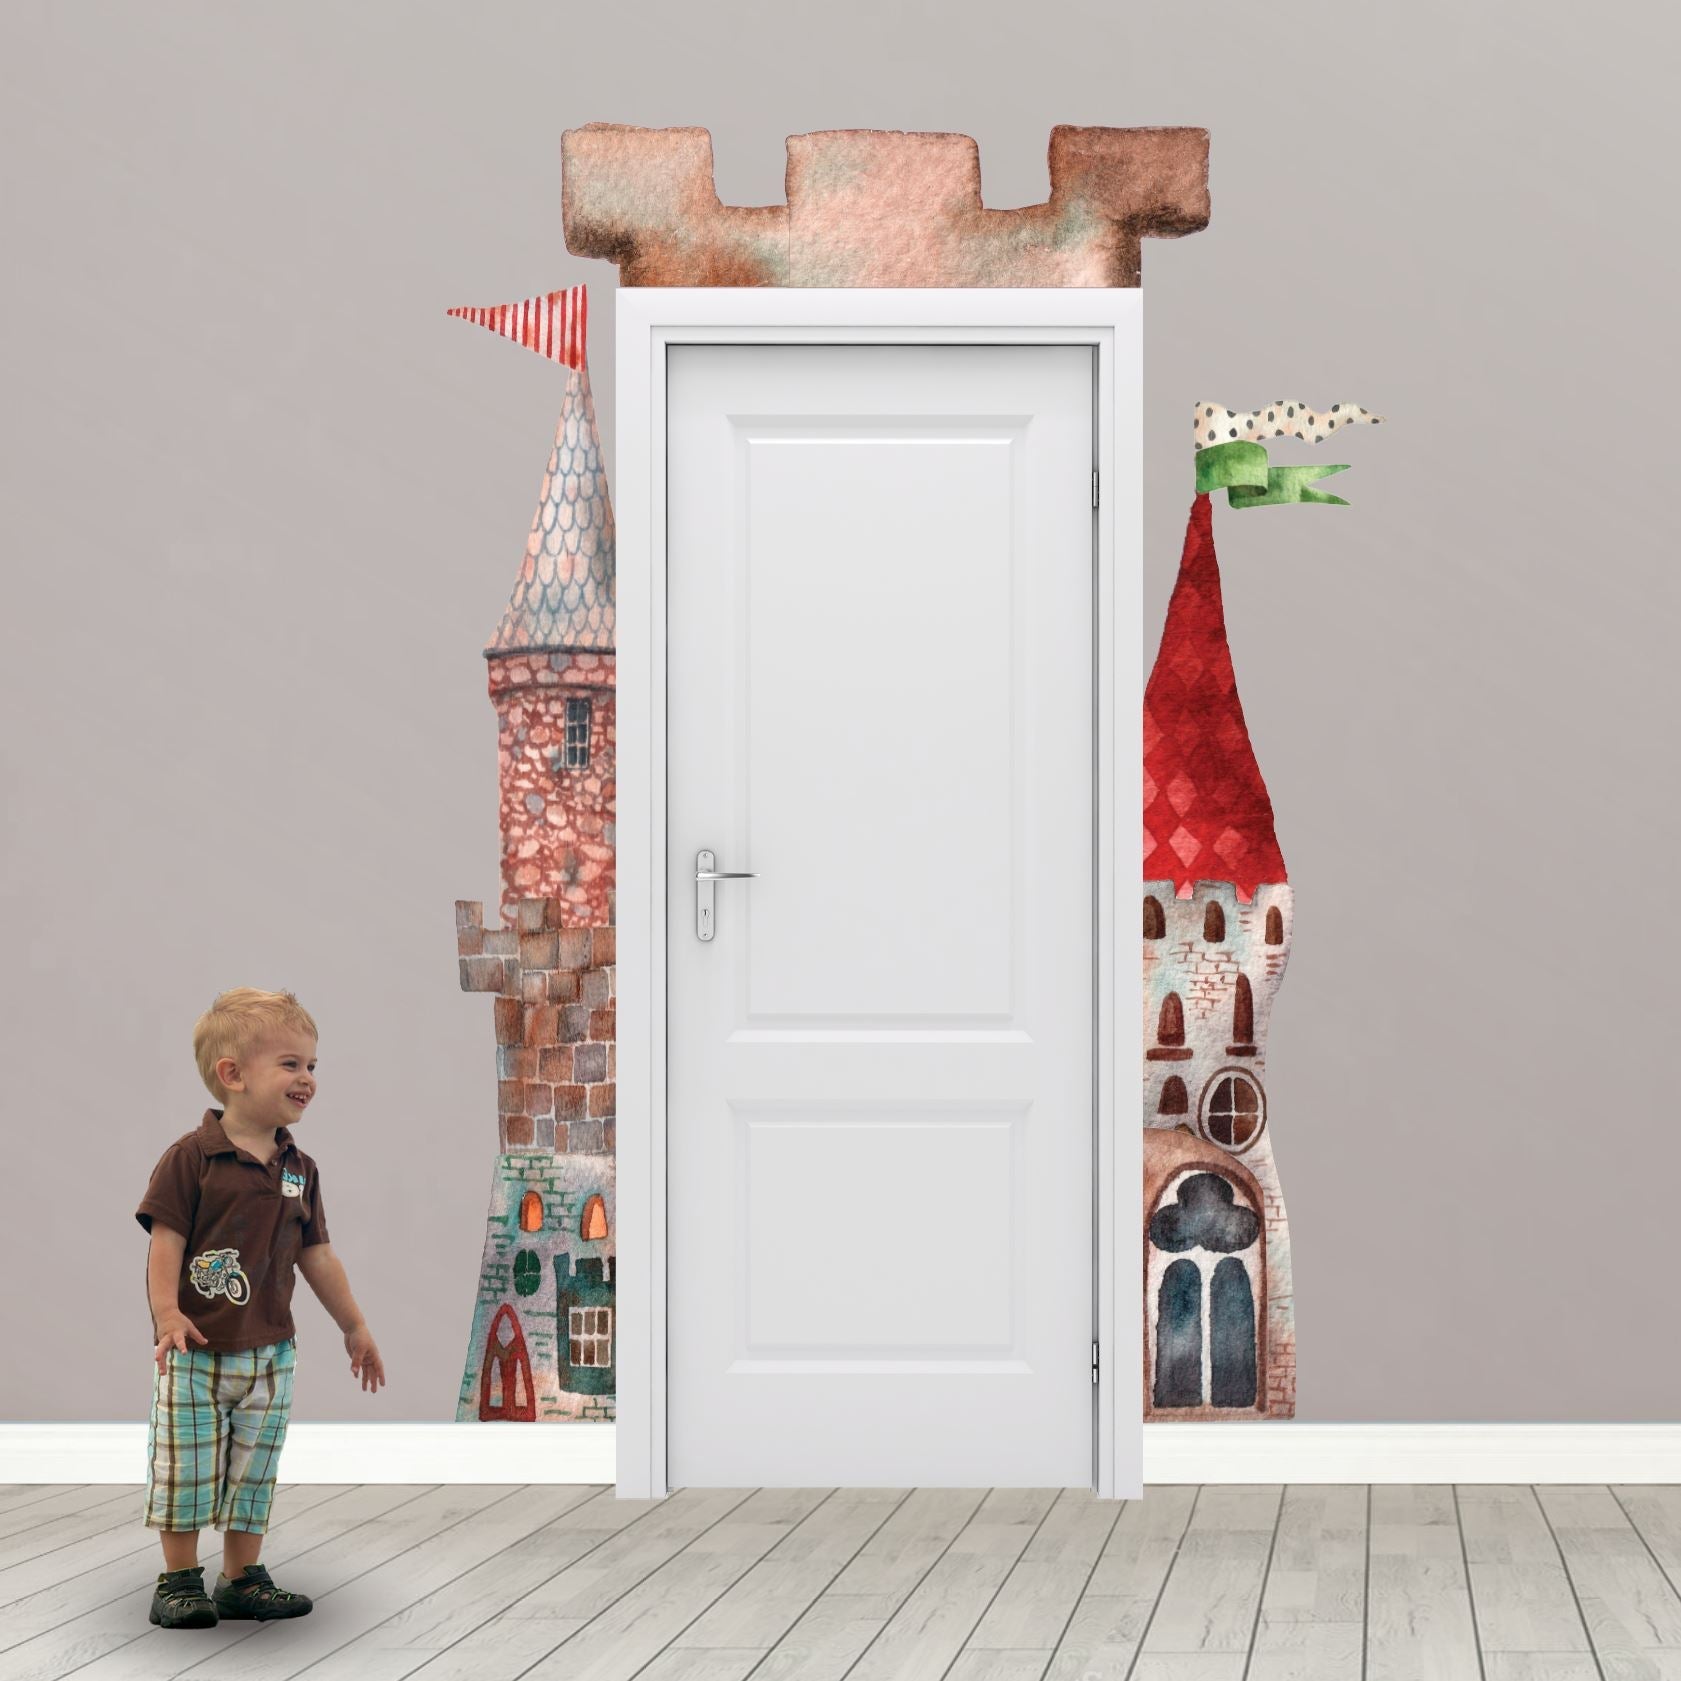 Castle and Dragons Wall Stickers | Door Decoration Wall Decals - Picture Perfect Decals